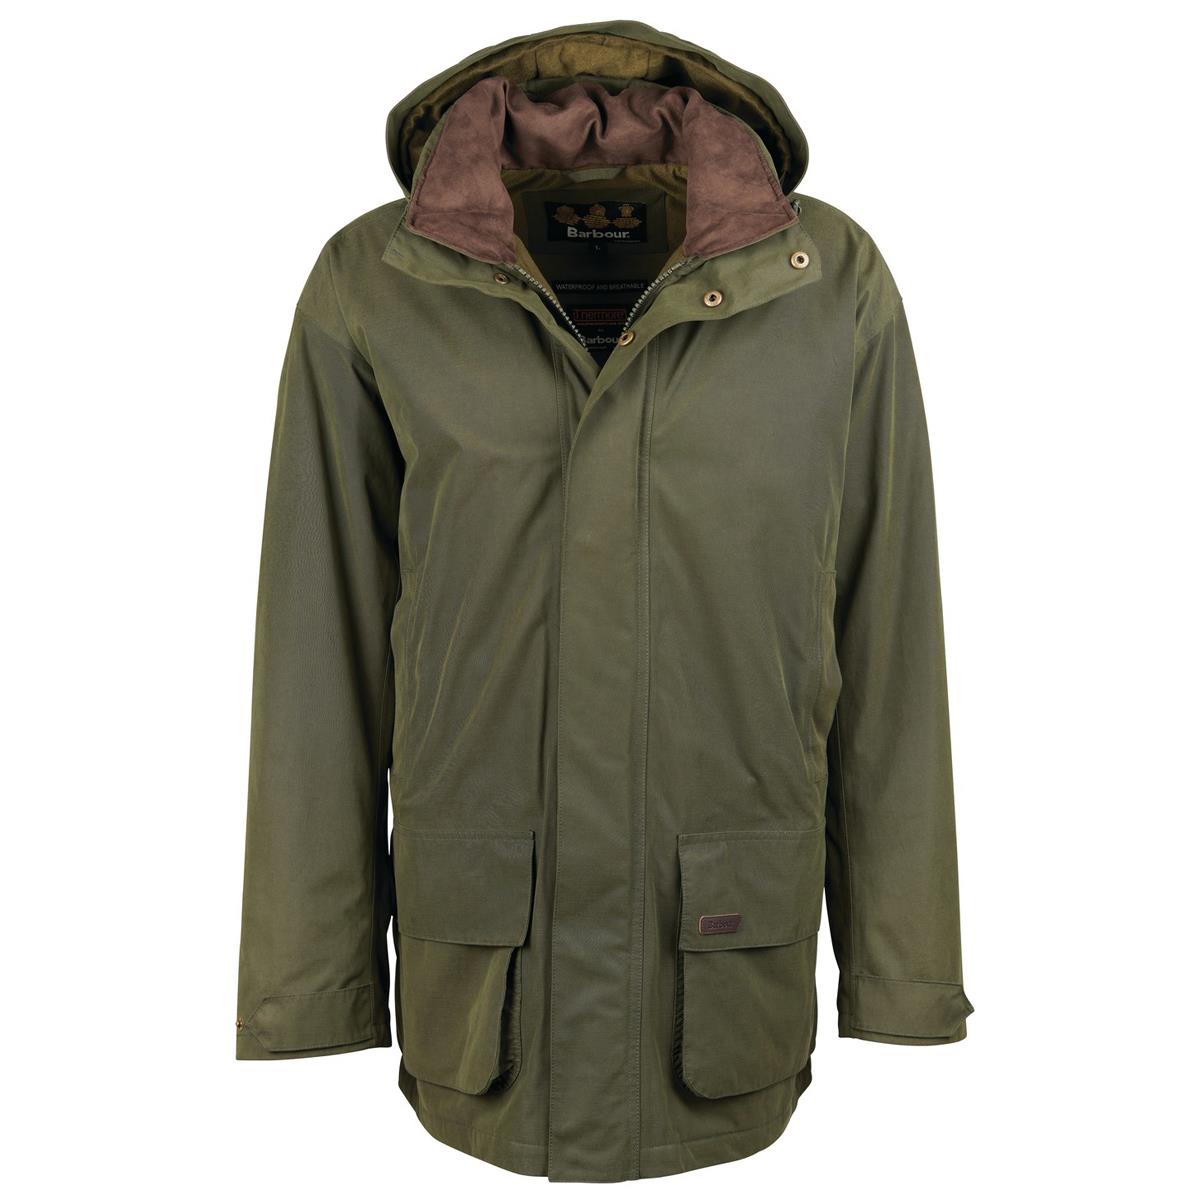 Can you describe the features of the Barbour Mens Beaconsfield Jacket?